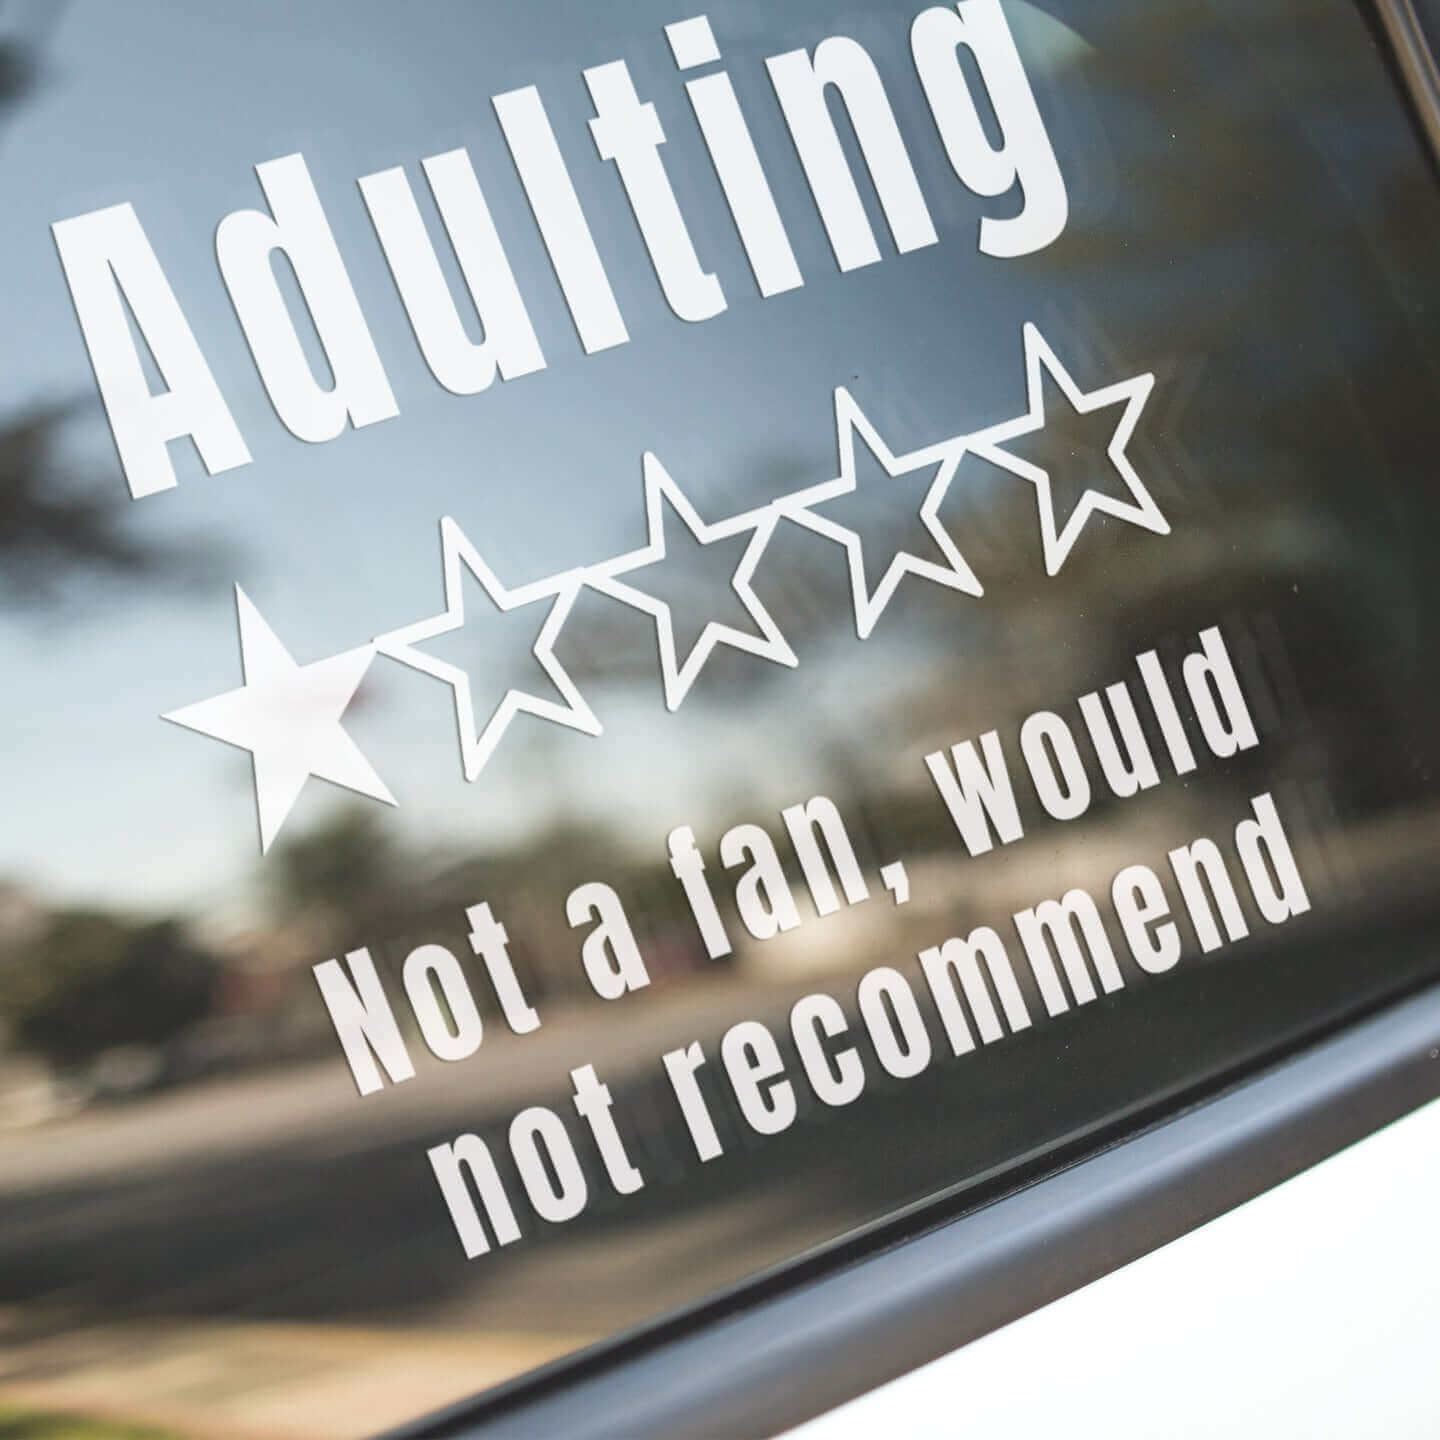 Adulting. Not a fan, would not recommend - Vinyl decal adult adulting adulting not a fan Die cut stickers funny sticker meme sticker sticker stickers vinyl sticker water proof sticker would not recommend